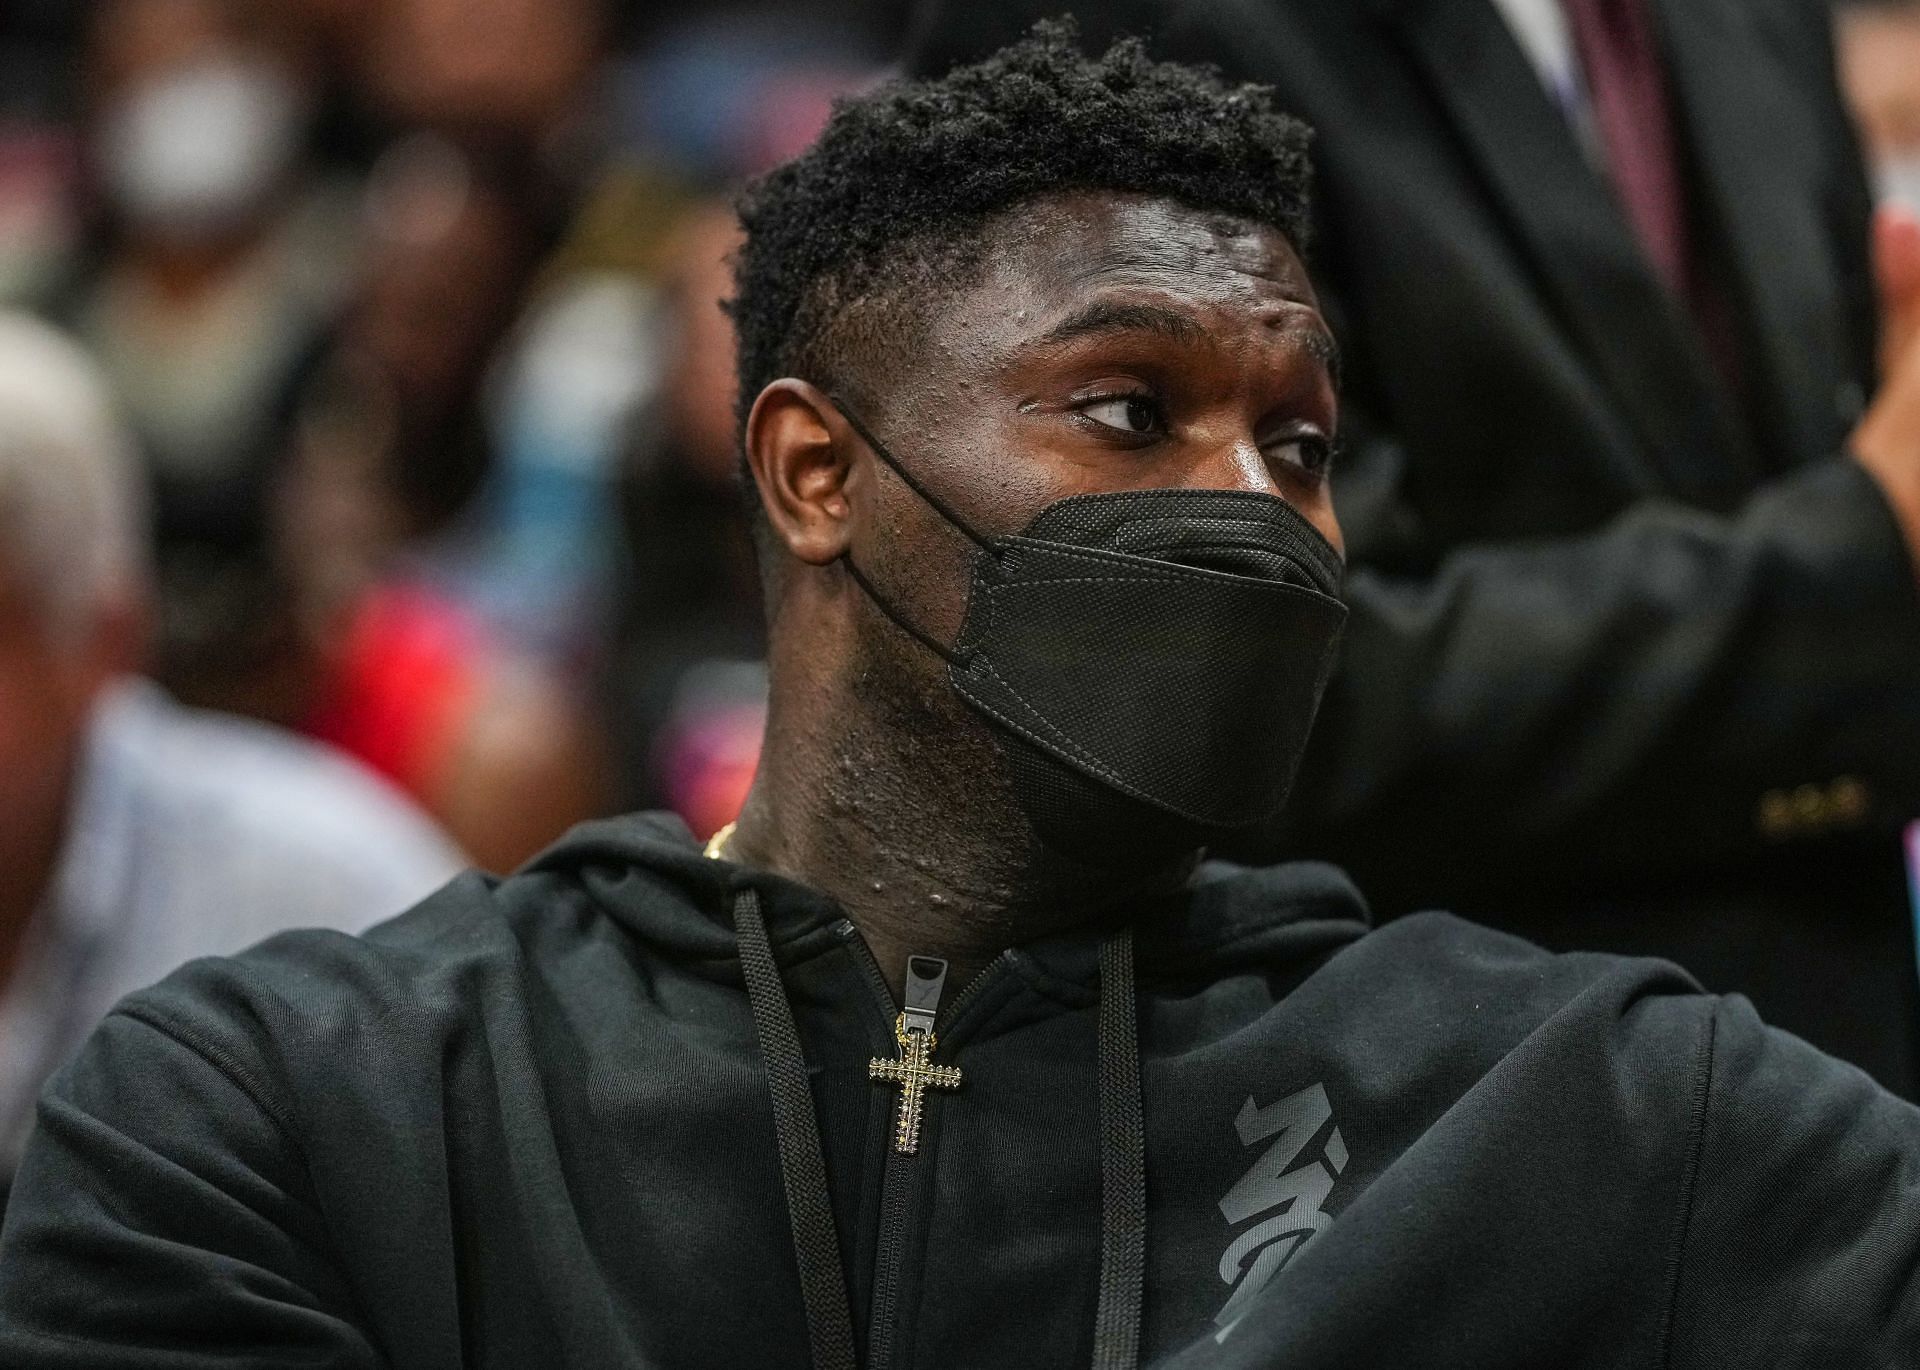 New Orleans Pelicans vs. Miami Heat: Zion Williamson seated due to injury